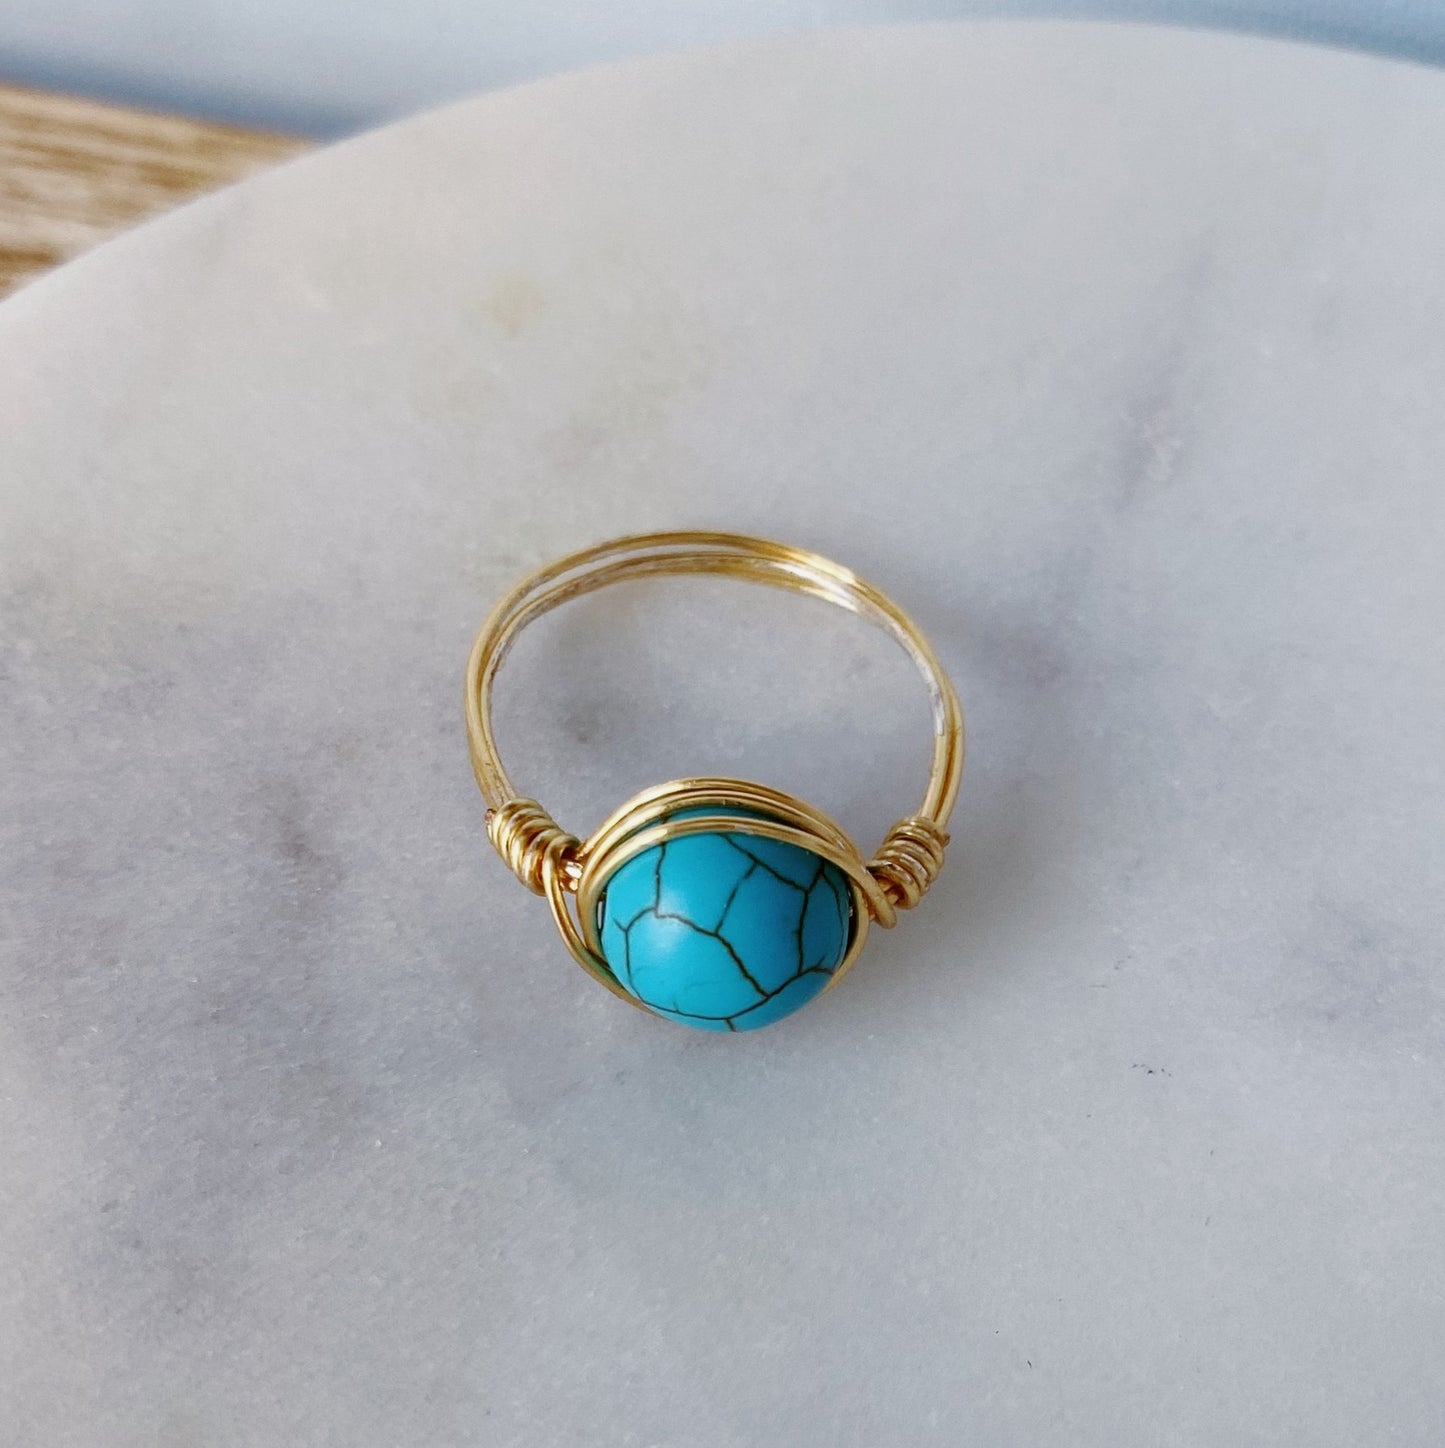 Turquoise howlite wire wrapped ring